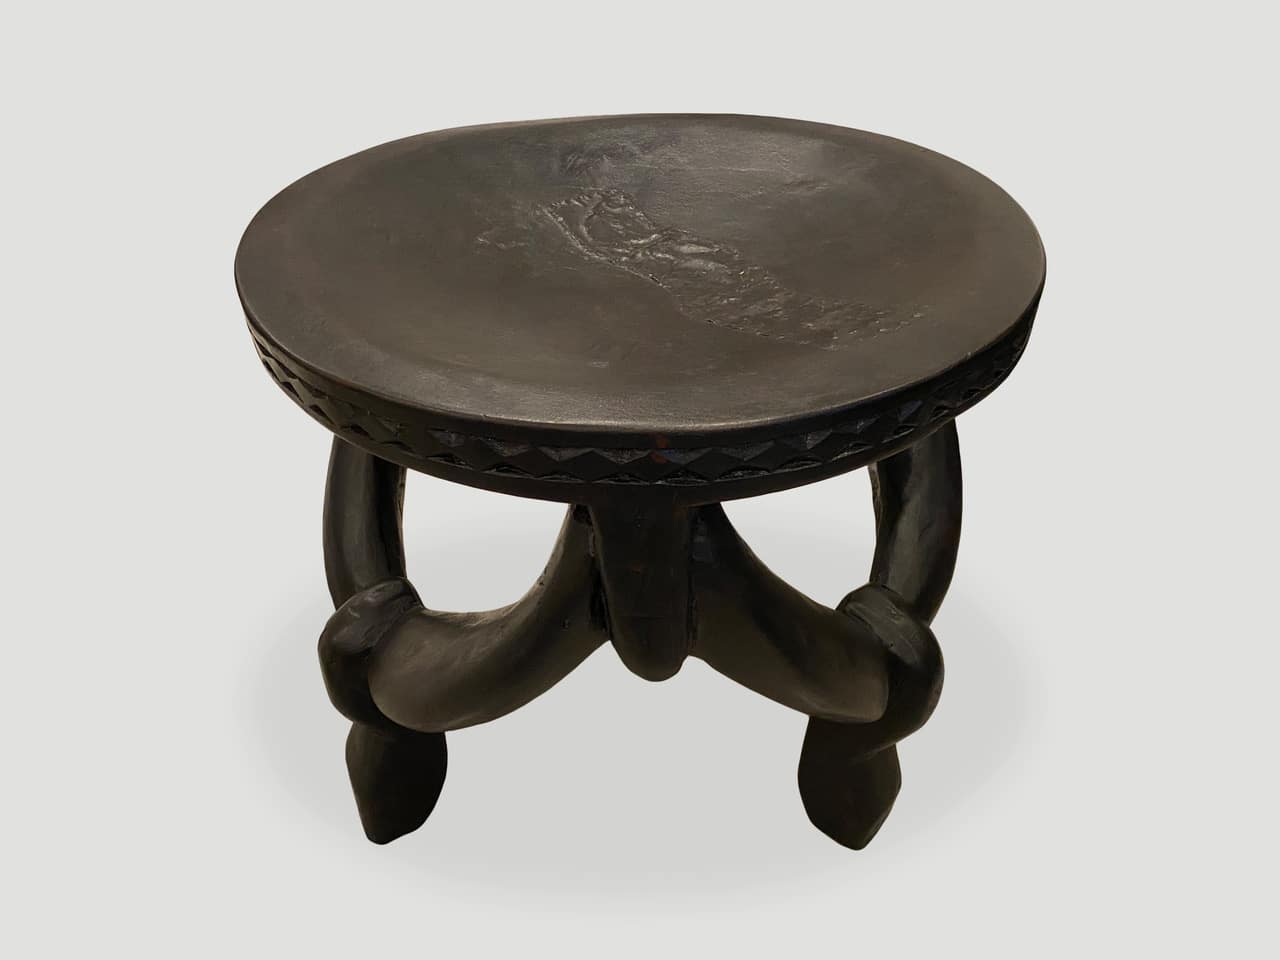 TANZANIAN ANTIQUE SCULPTURAL SIDE TABLE OR STOOL.